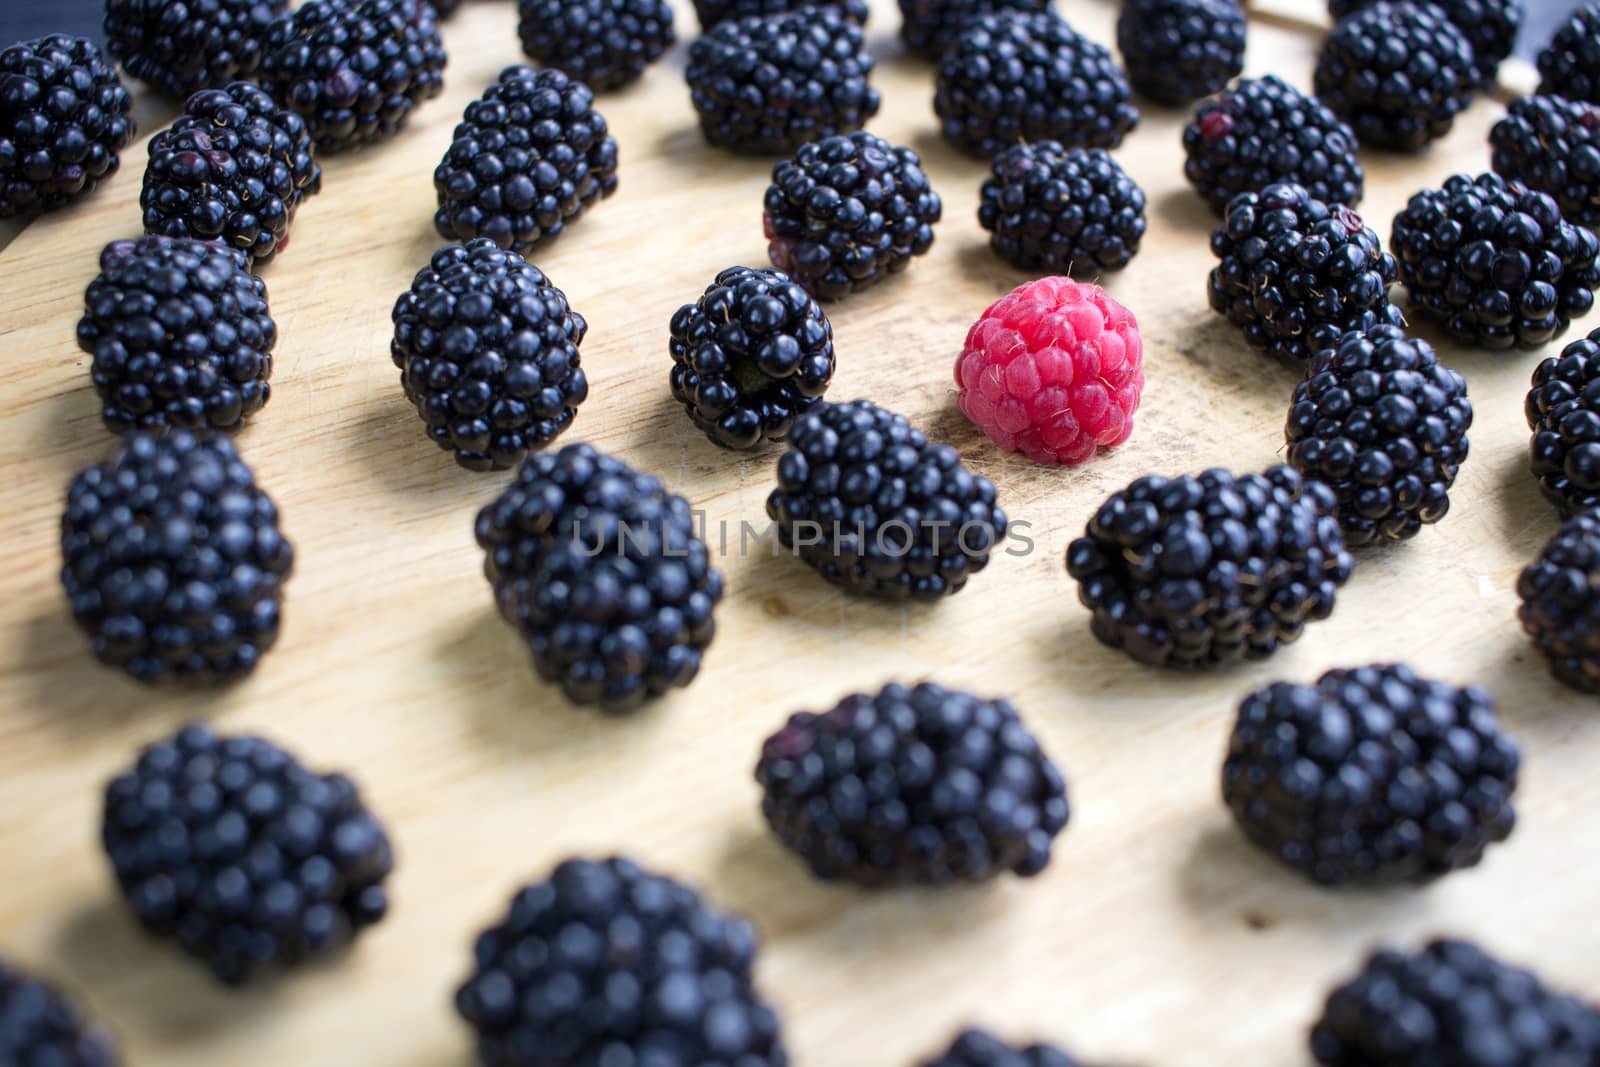 Tasty juicy berries set of many blackberries and one raspberry among them on wooden background